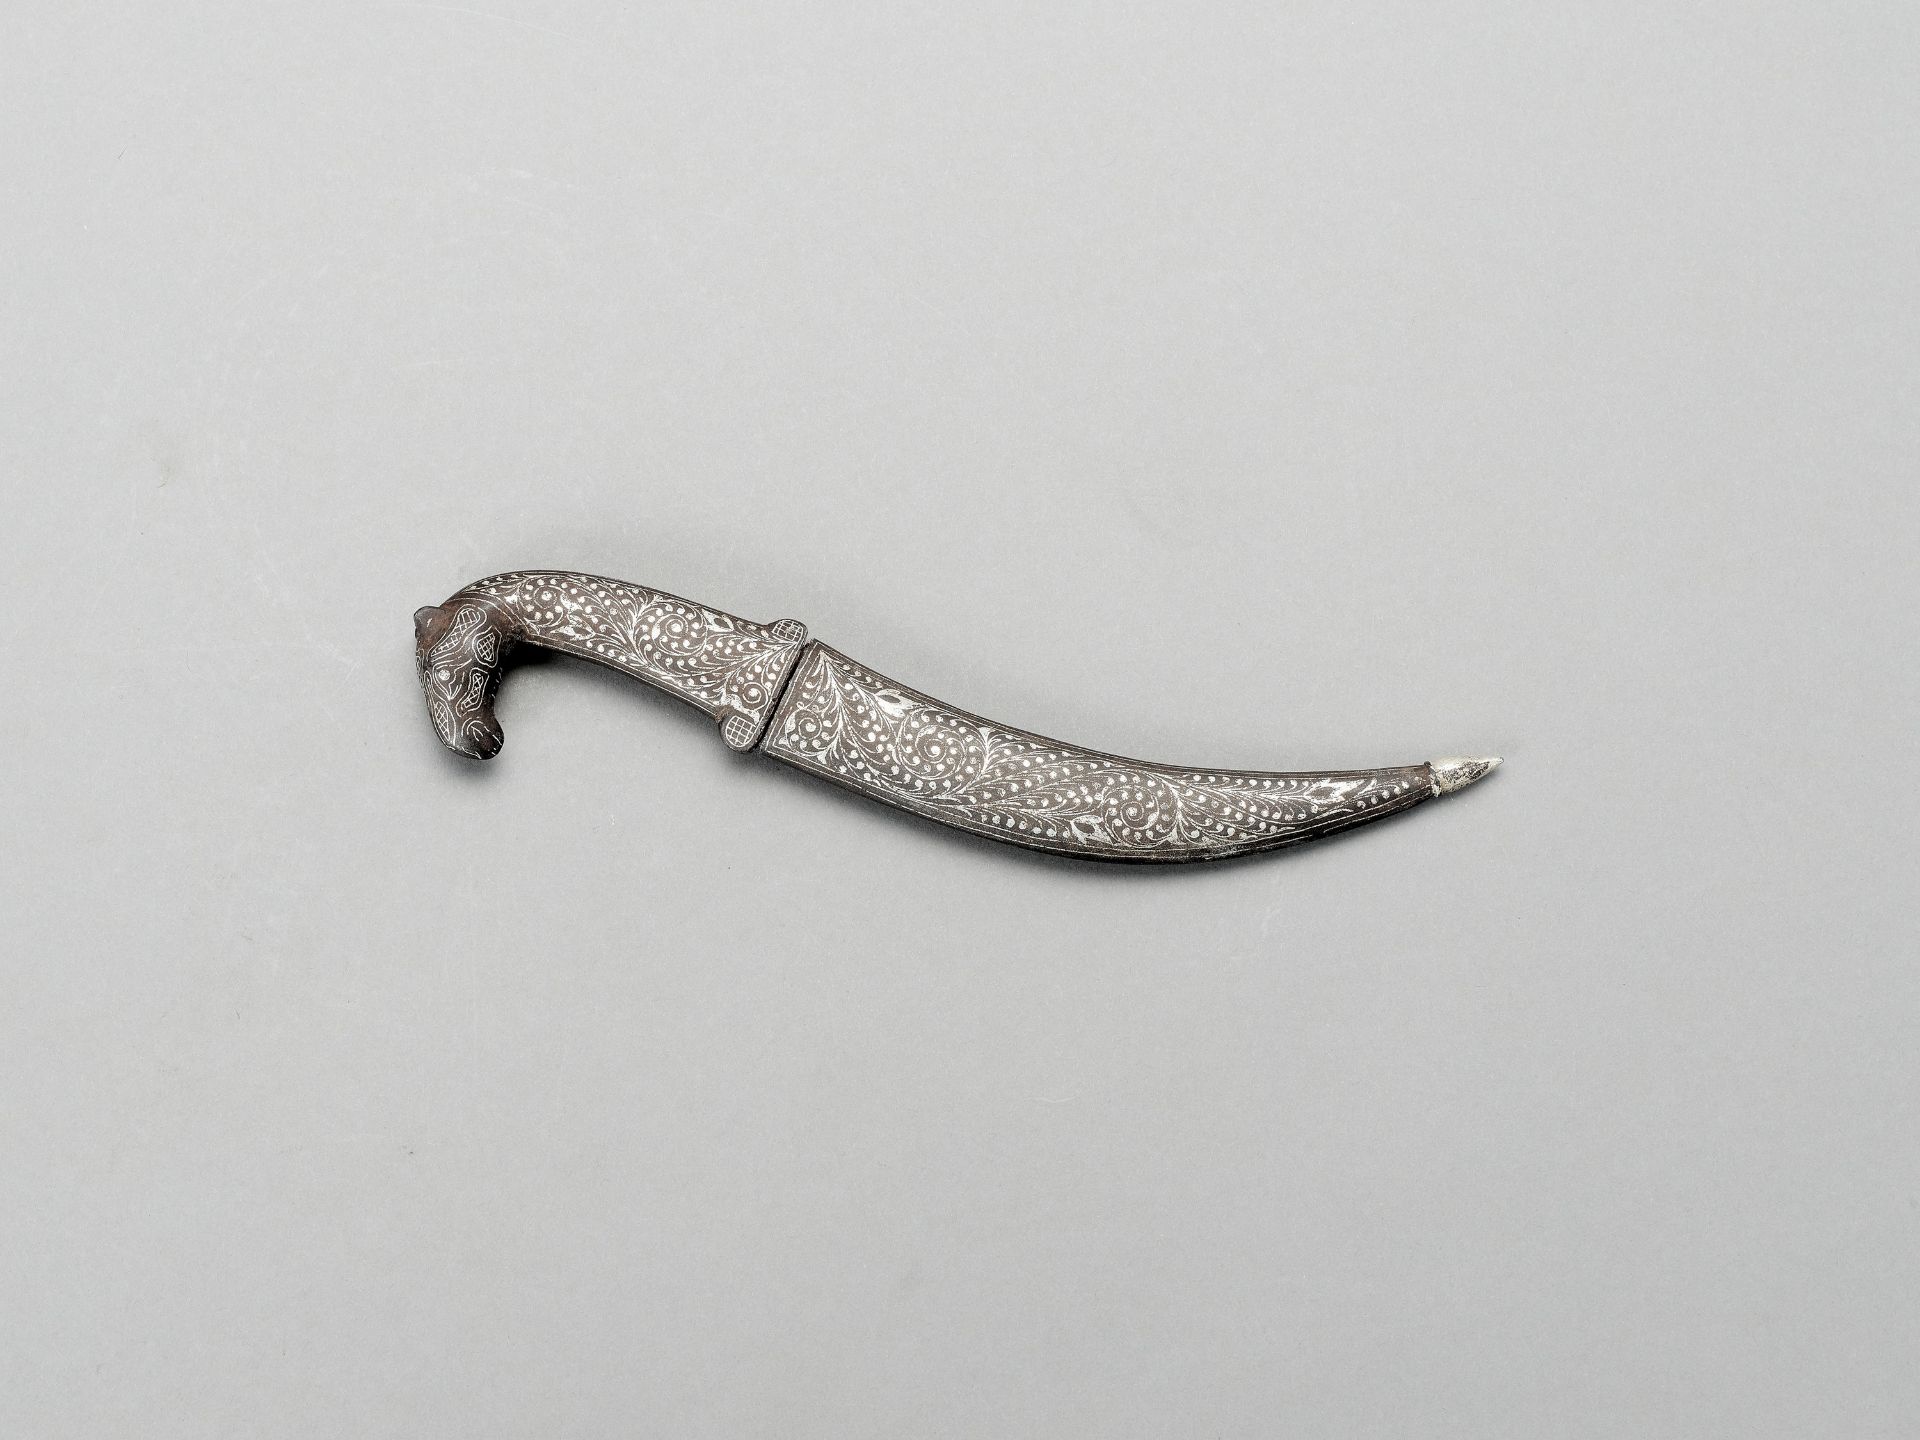 A MUGHAL STYLE DAGGER - Image 4 of 4